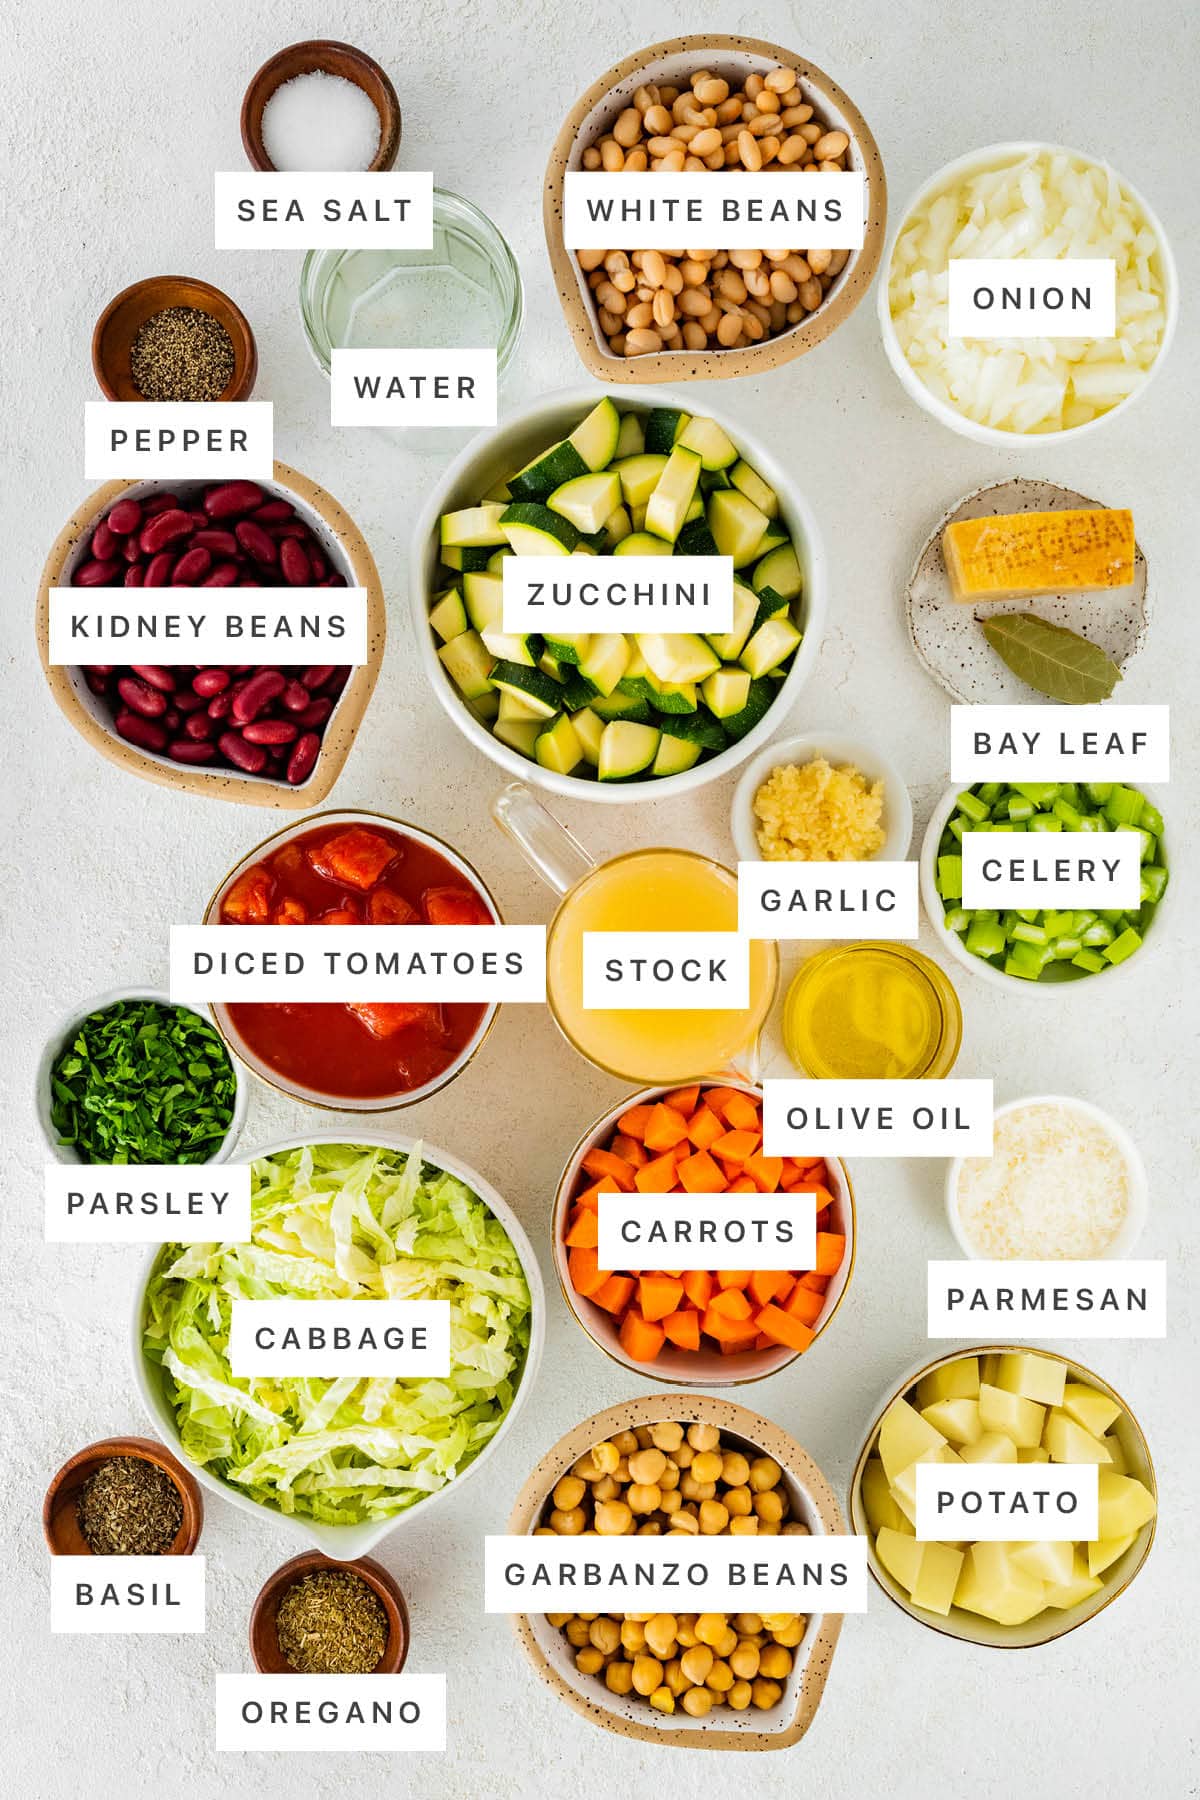 Ingredients measured out to make Slow Cooker Minestrone Soup: sea salt, pepper, water, white beans, onion, kidney beans, zucchini, bay leaf, diced tomatoes, stock, garlic, celery, olive oil, parsley, cabbage, carrots, parmesan, basil, oregano, garbanzo beans and potato.